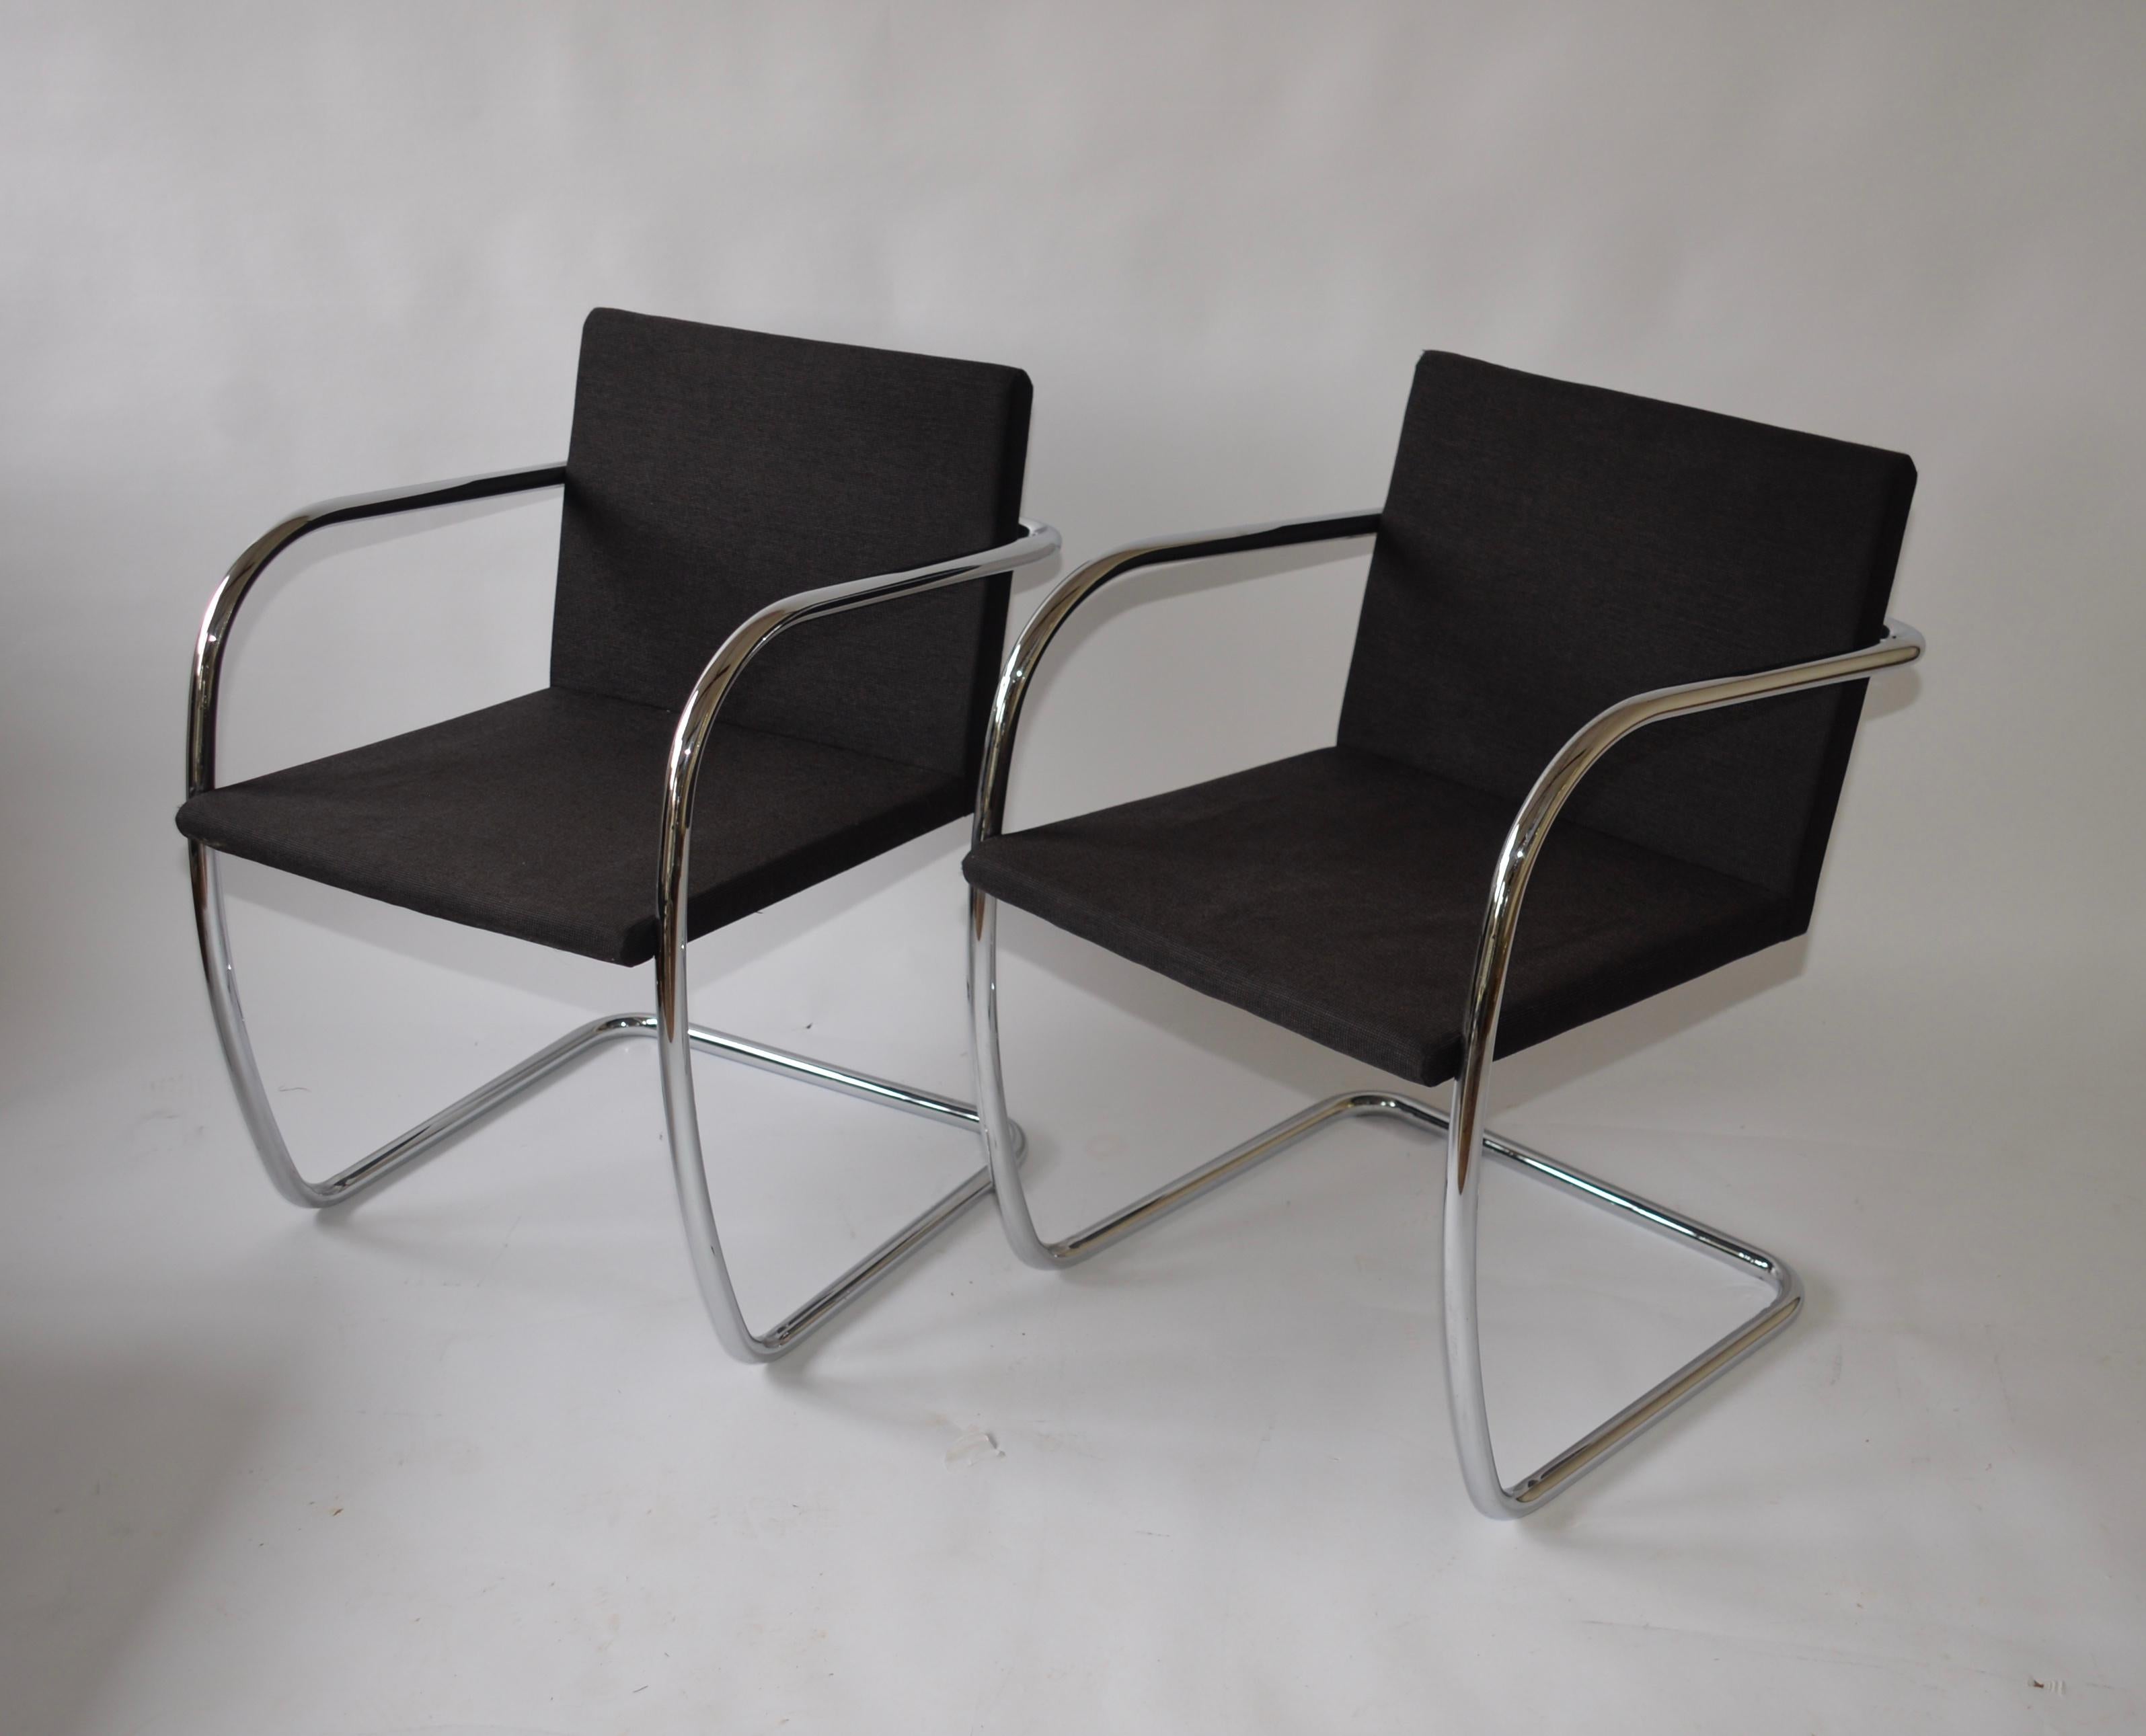 Czech Pair of Mies van der Rohe Brno Chairs